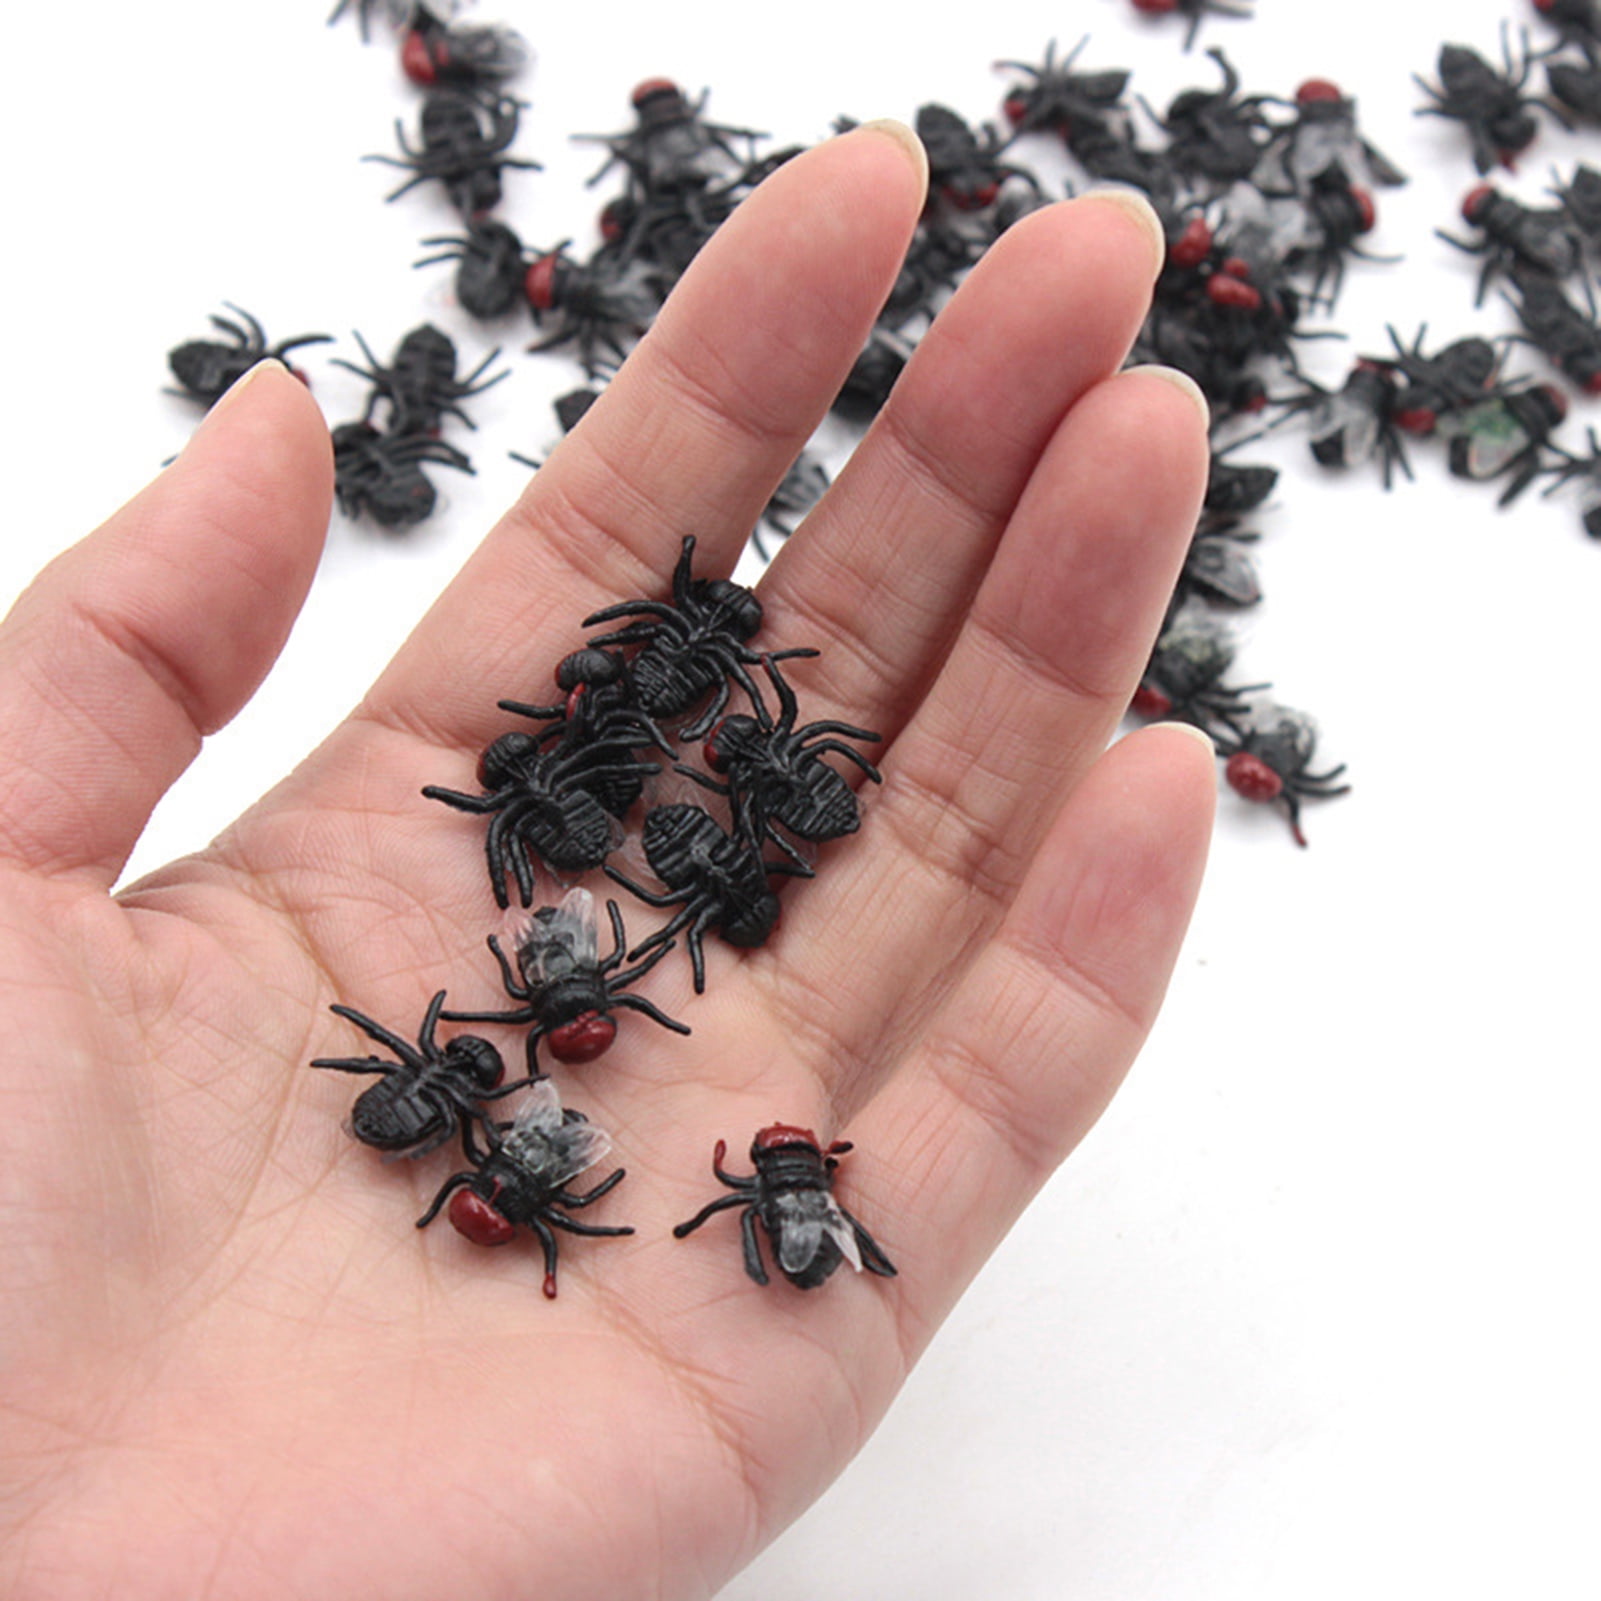 Halloween Party Plastic Insect Flys Joking Toys Prank Prop Black Decoration 